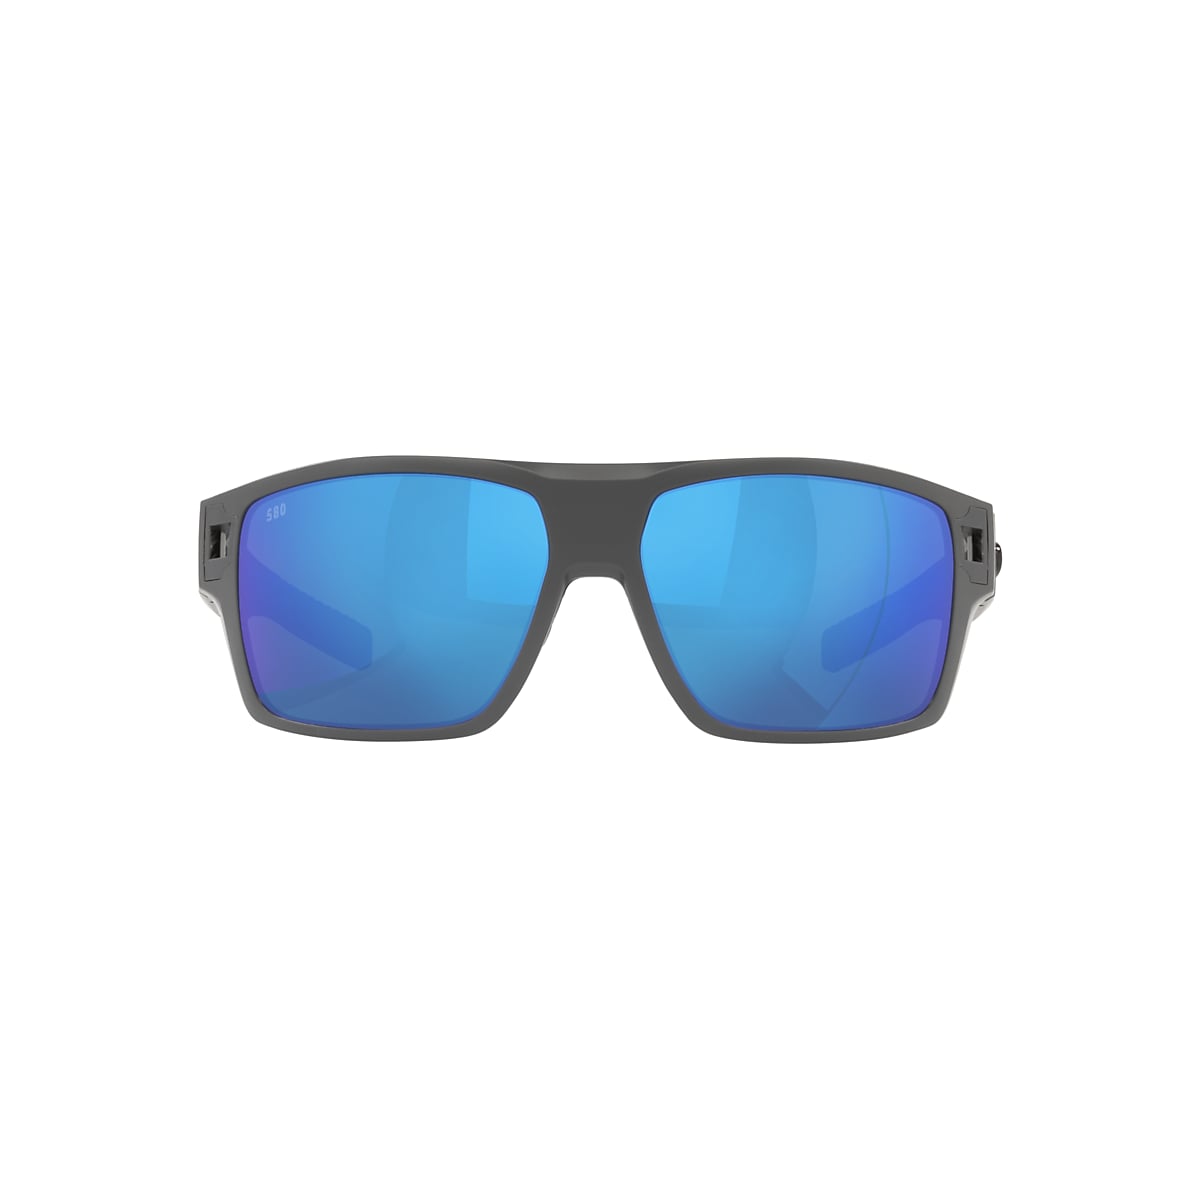 Mens Trendy Polarized Best Sunglasses 2022 With Transparent Blue Polygonal  Metal Design For Driving And Seaside Travel From Lululemens001, $20.73